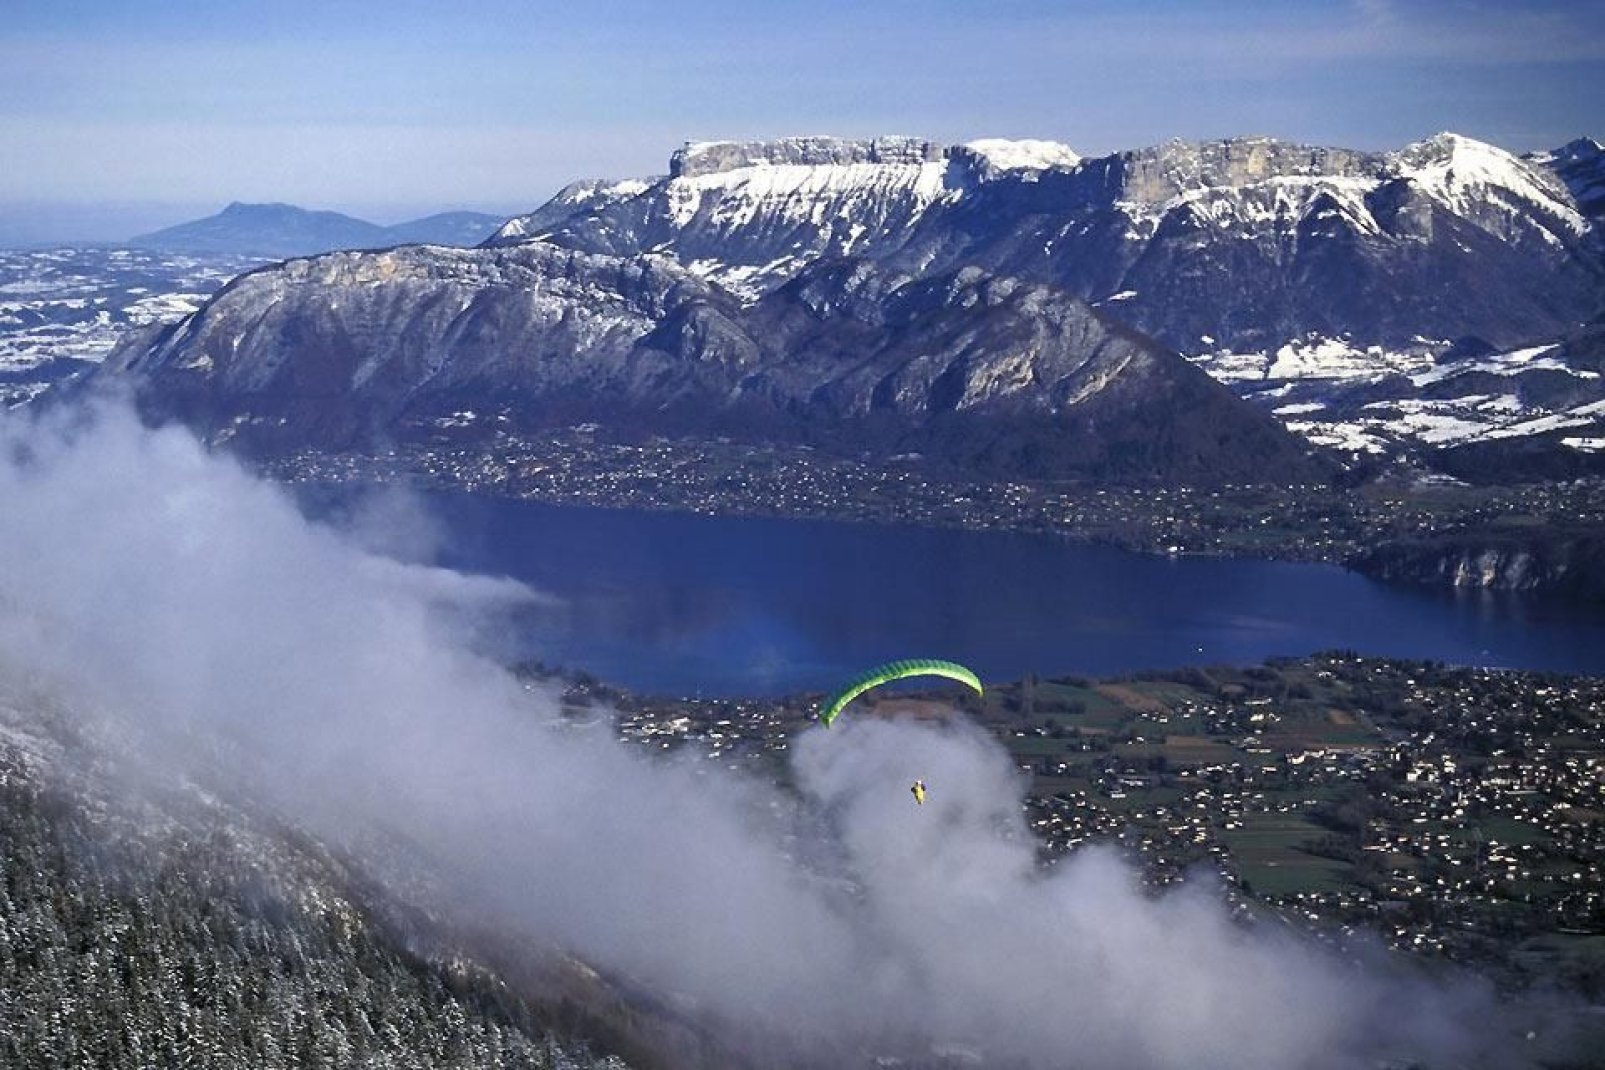 Whether it's paragliding, hang-gliding, or bungee-jumping you're into, thrill seekers will be in their element at Lake Annecy!